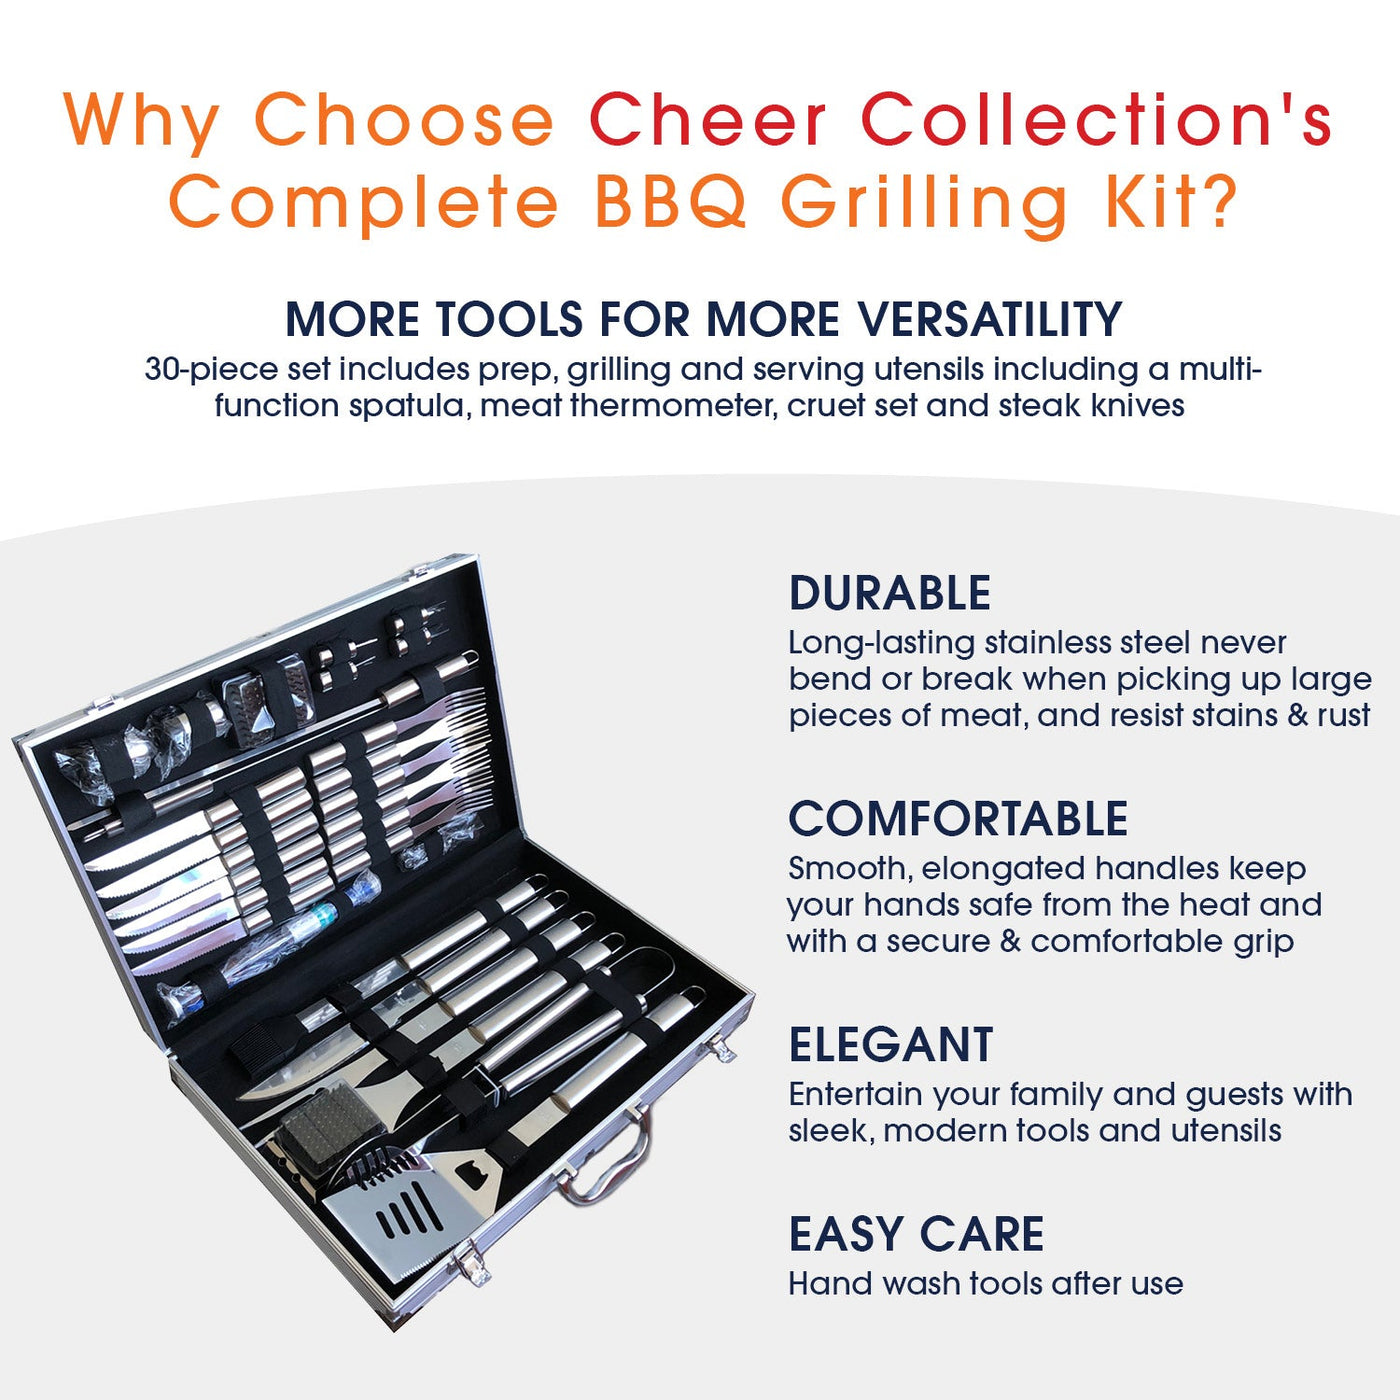 Cheer Collection Stainless Steel Grilling Tool Set & Reviews